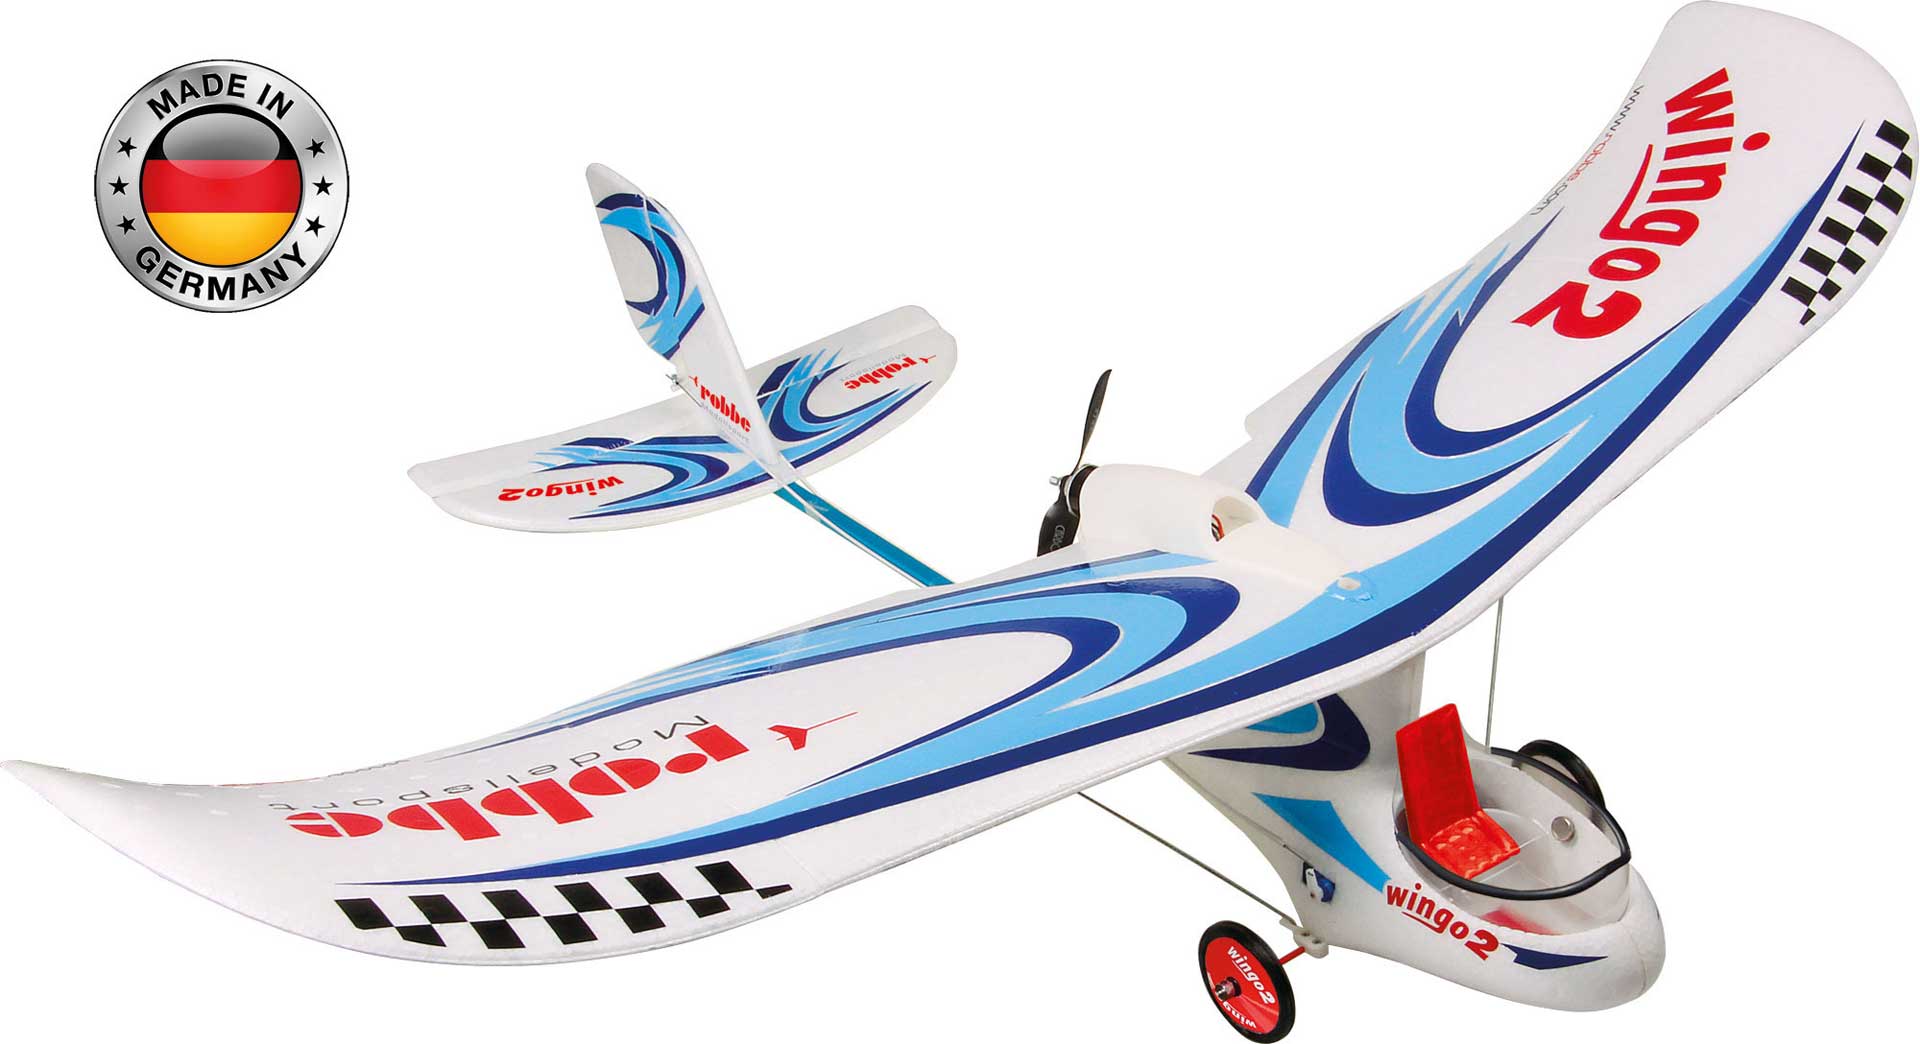 Robbe Modellsport WINGO 2 KIT "YOU CAN FLY" with Brushless Motor, ESC and Servos